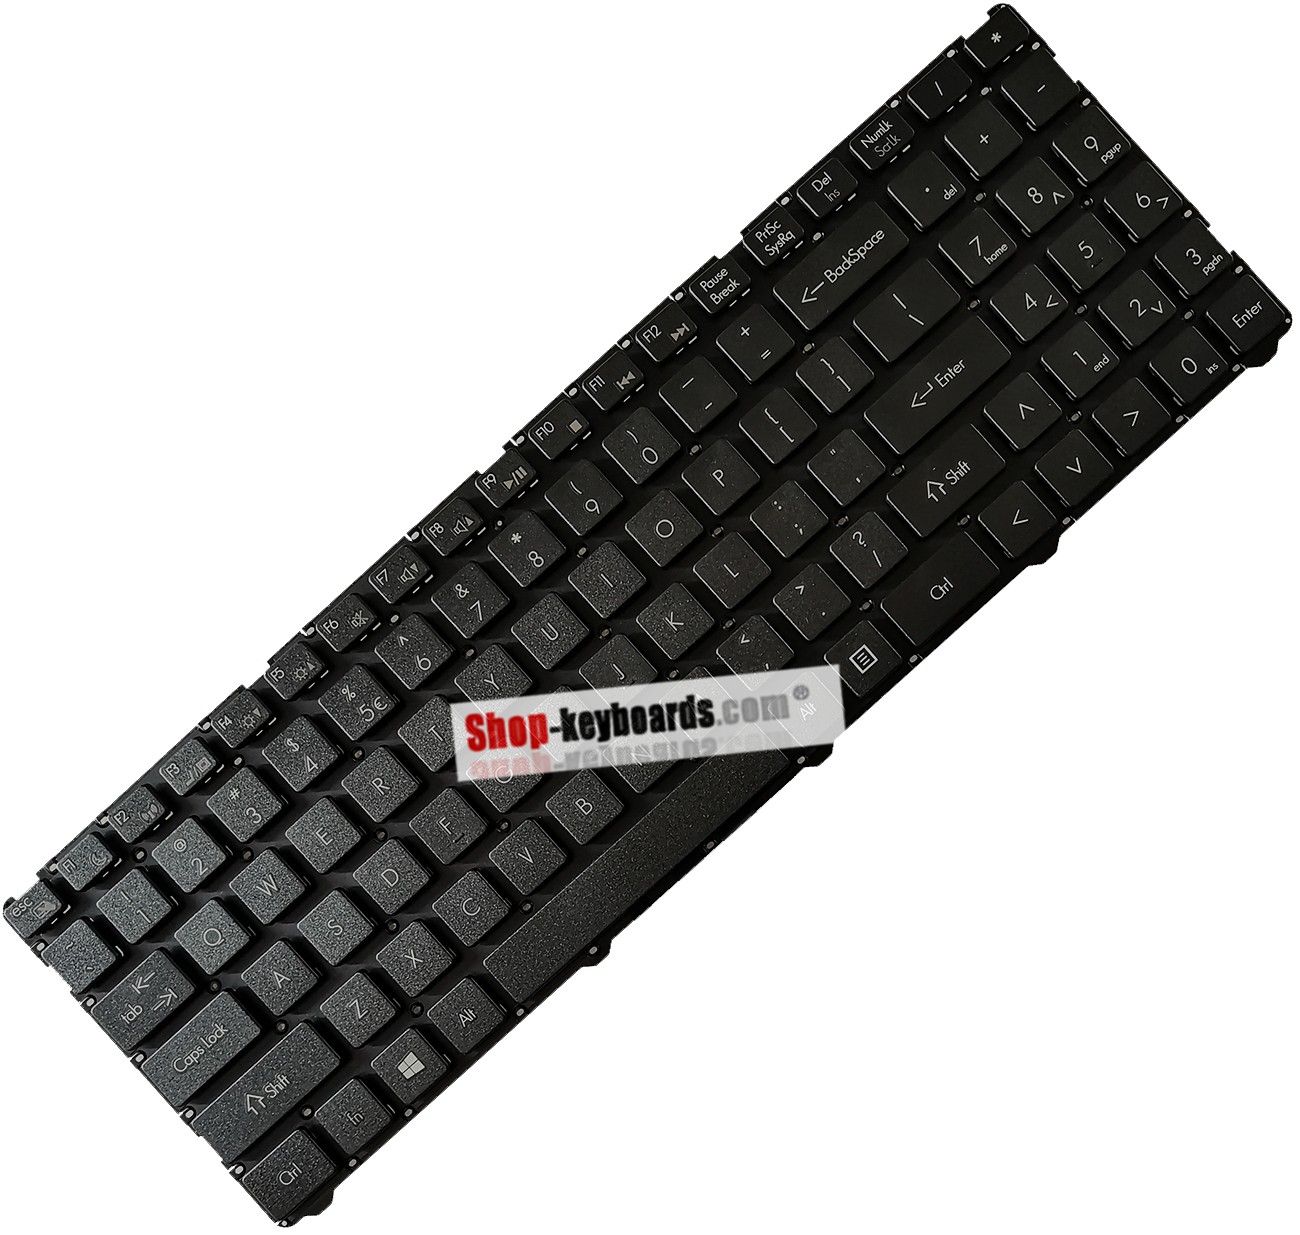 LG 15UD470-KX50K Keyboard replacement